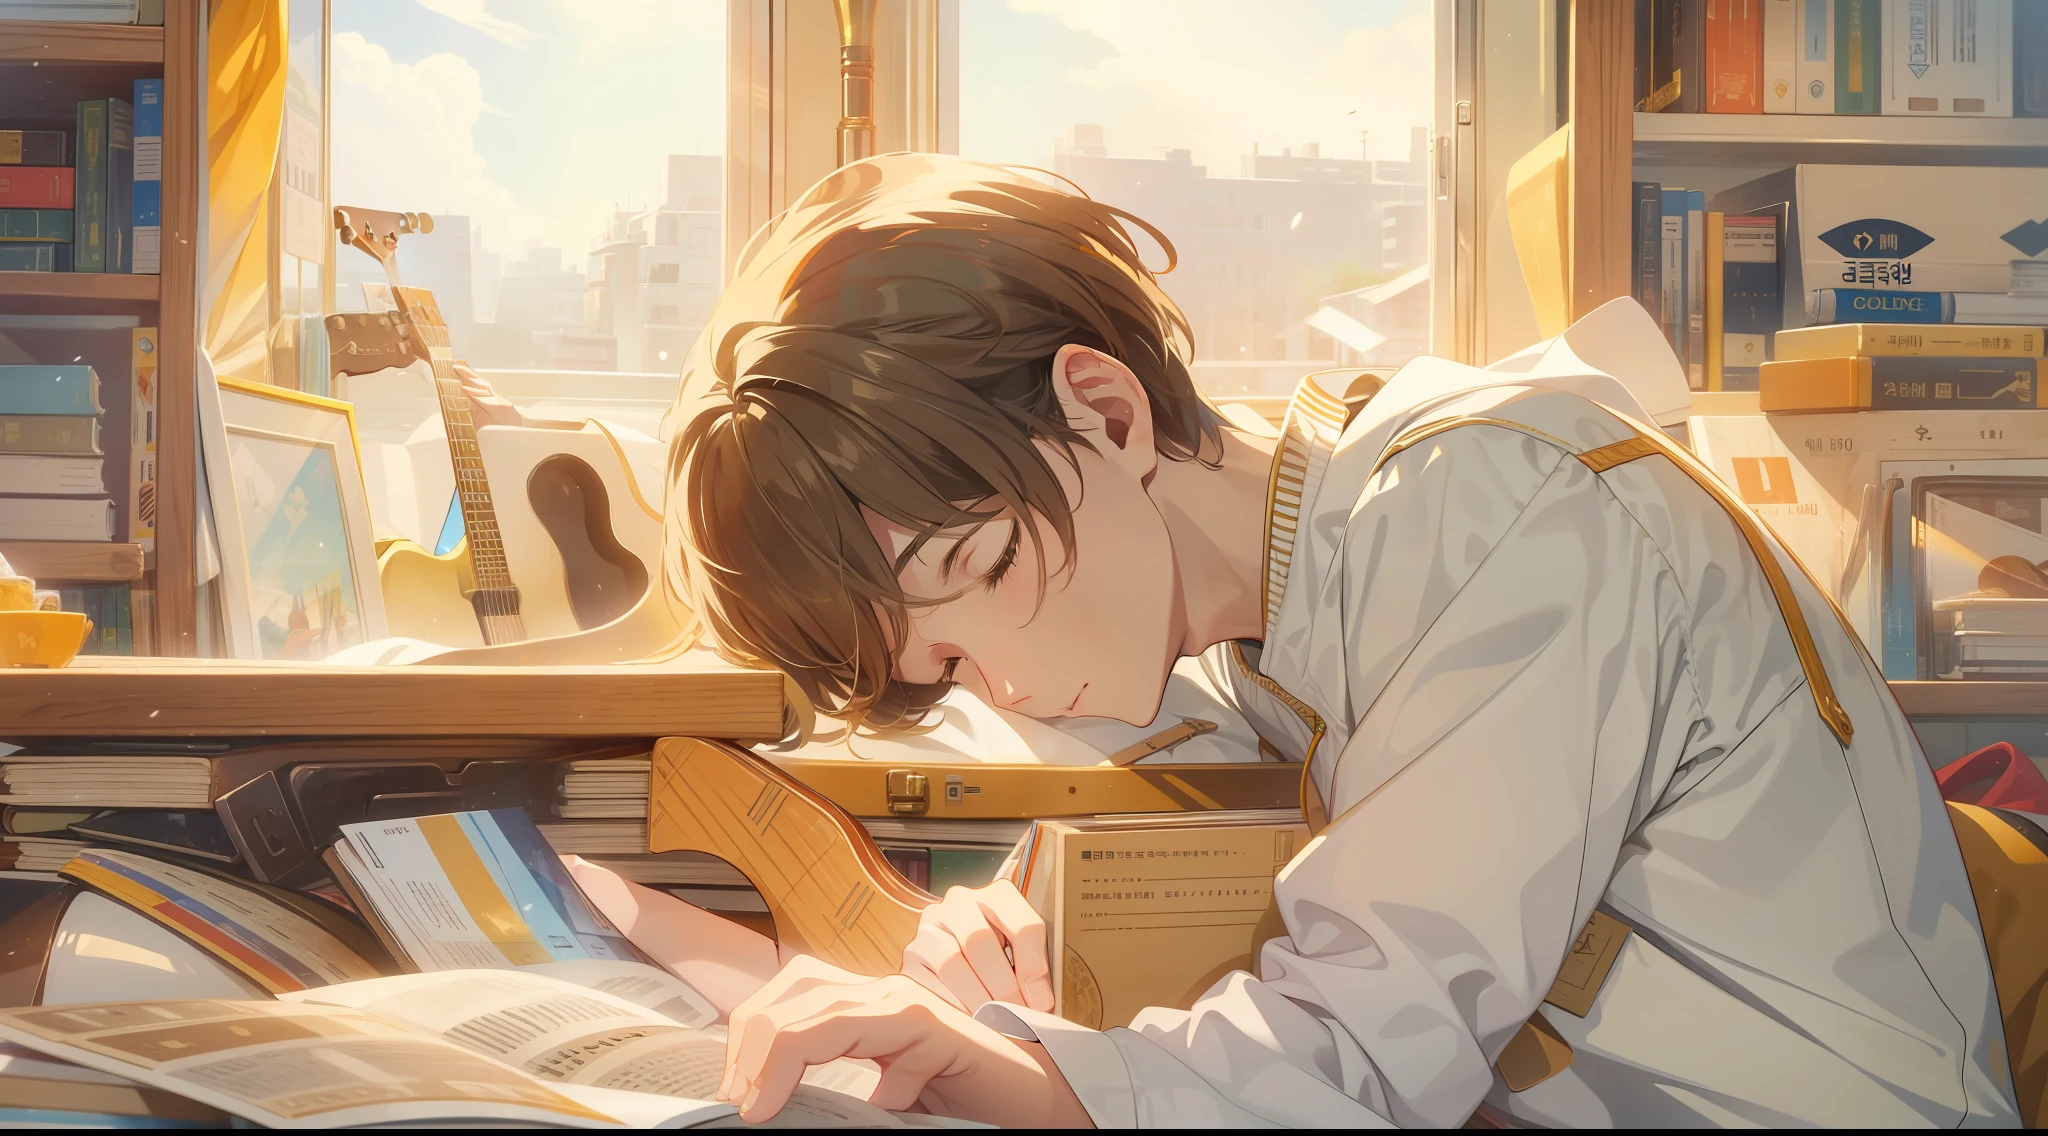 A young male artist with short brown hair sleeping, study , golden light, guitars, musical instruments, white cat, different eye color, bookshelves high to the roof, soft dream scene, light brown and yellow, bright palette, wide bright yellow, animated artistic style, OShare Kei, accurate painting, Traincore, Korea Wave, in the style of light-filled compositions, precision painting, Traincore, Korean wave, long lens